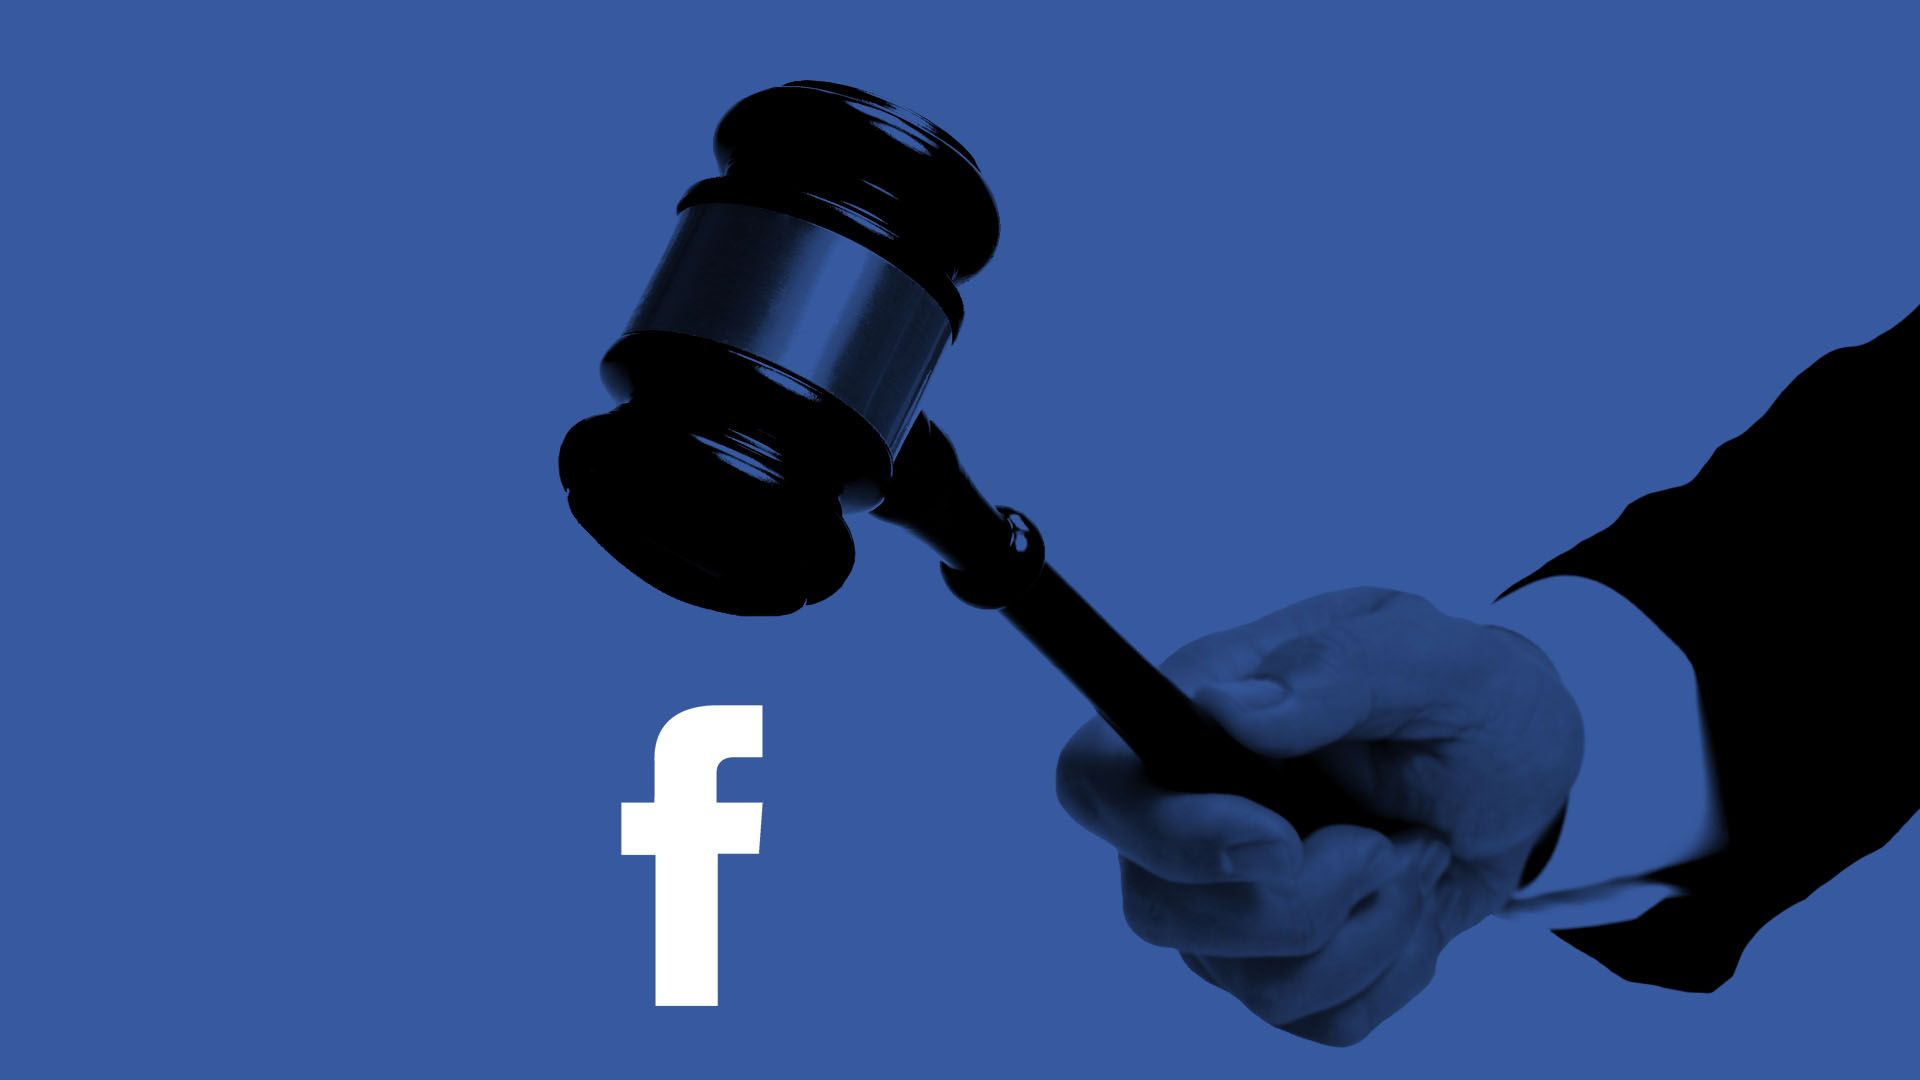 Illustration a hand holding a gavel over the facebook logo